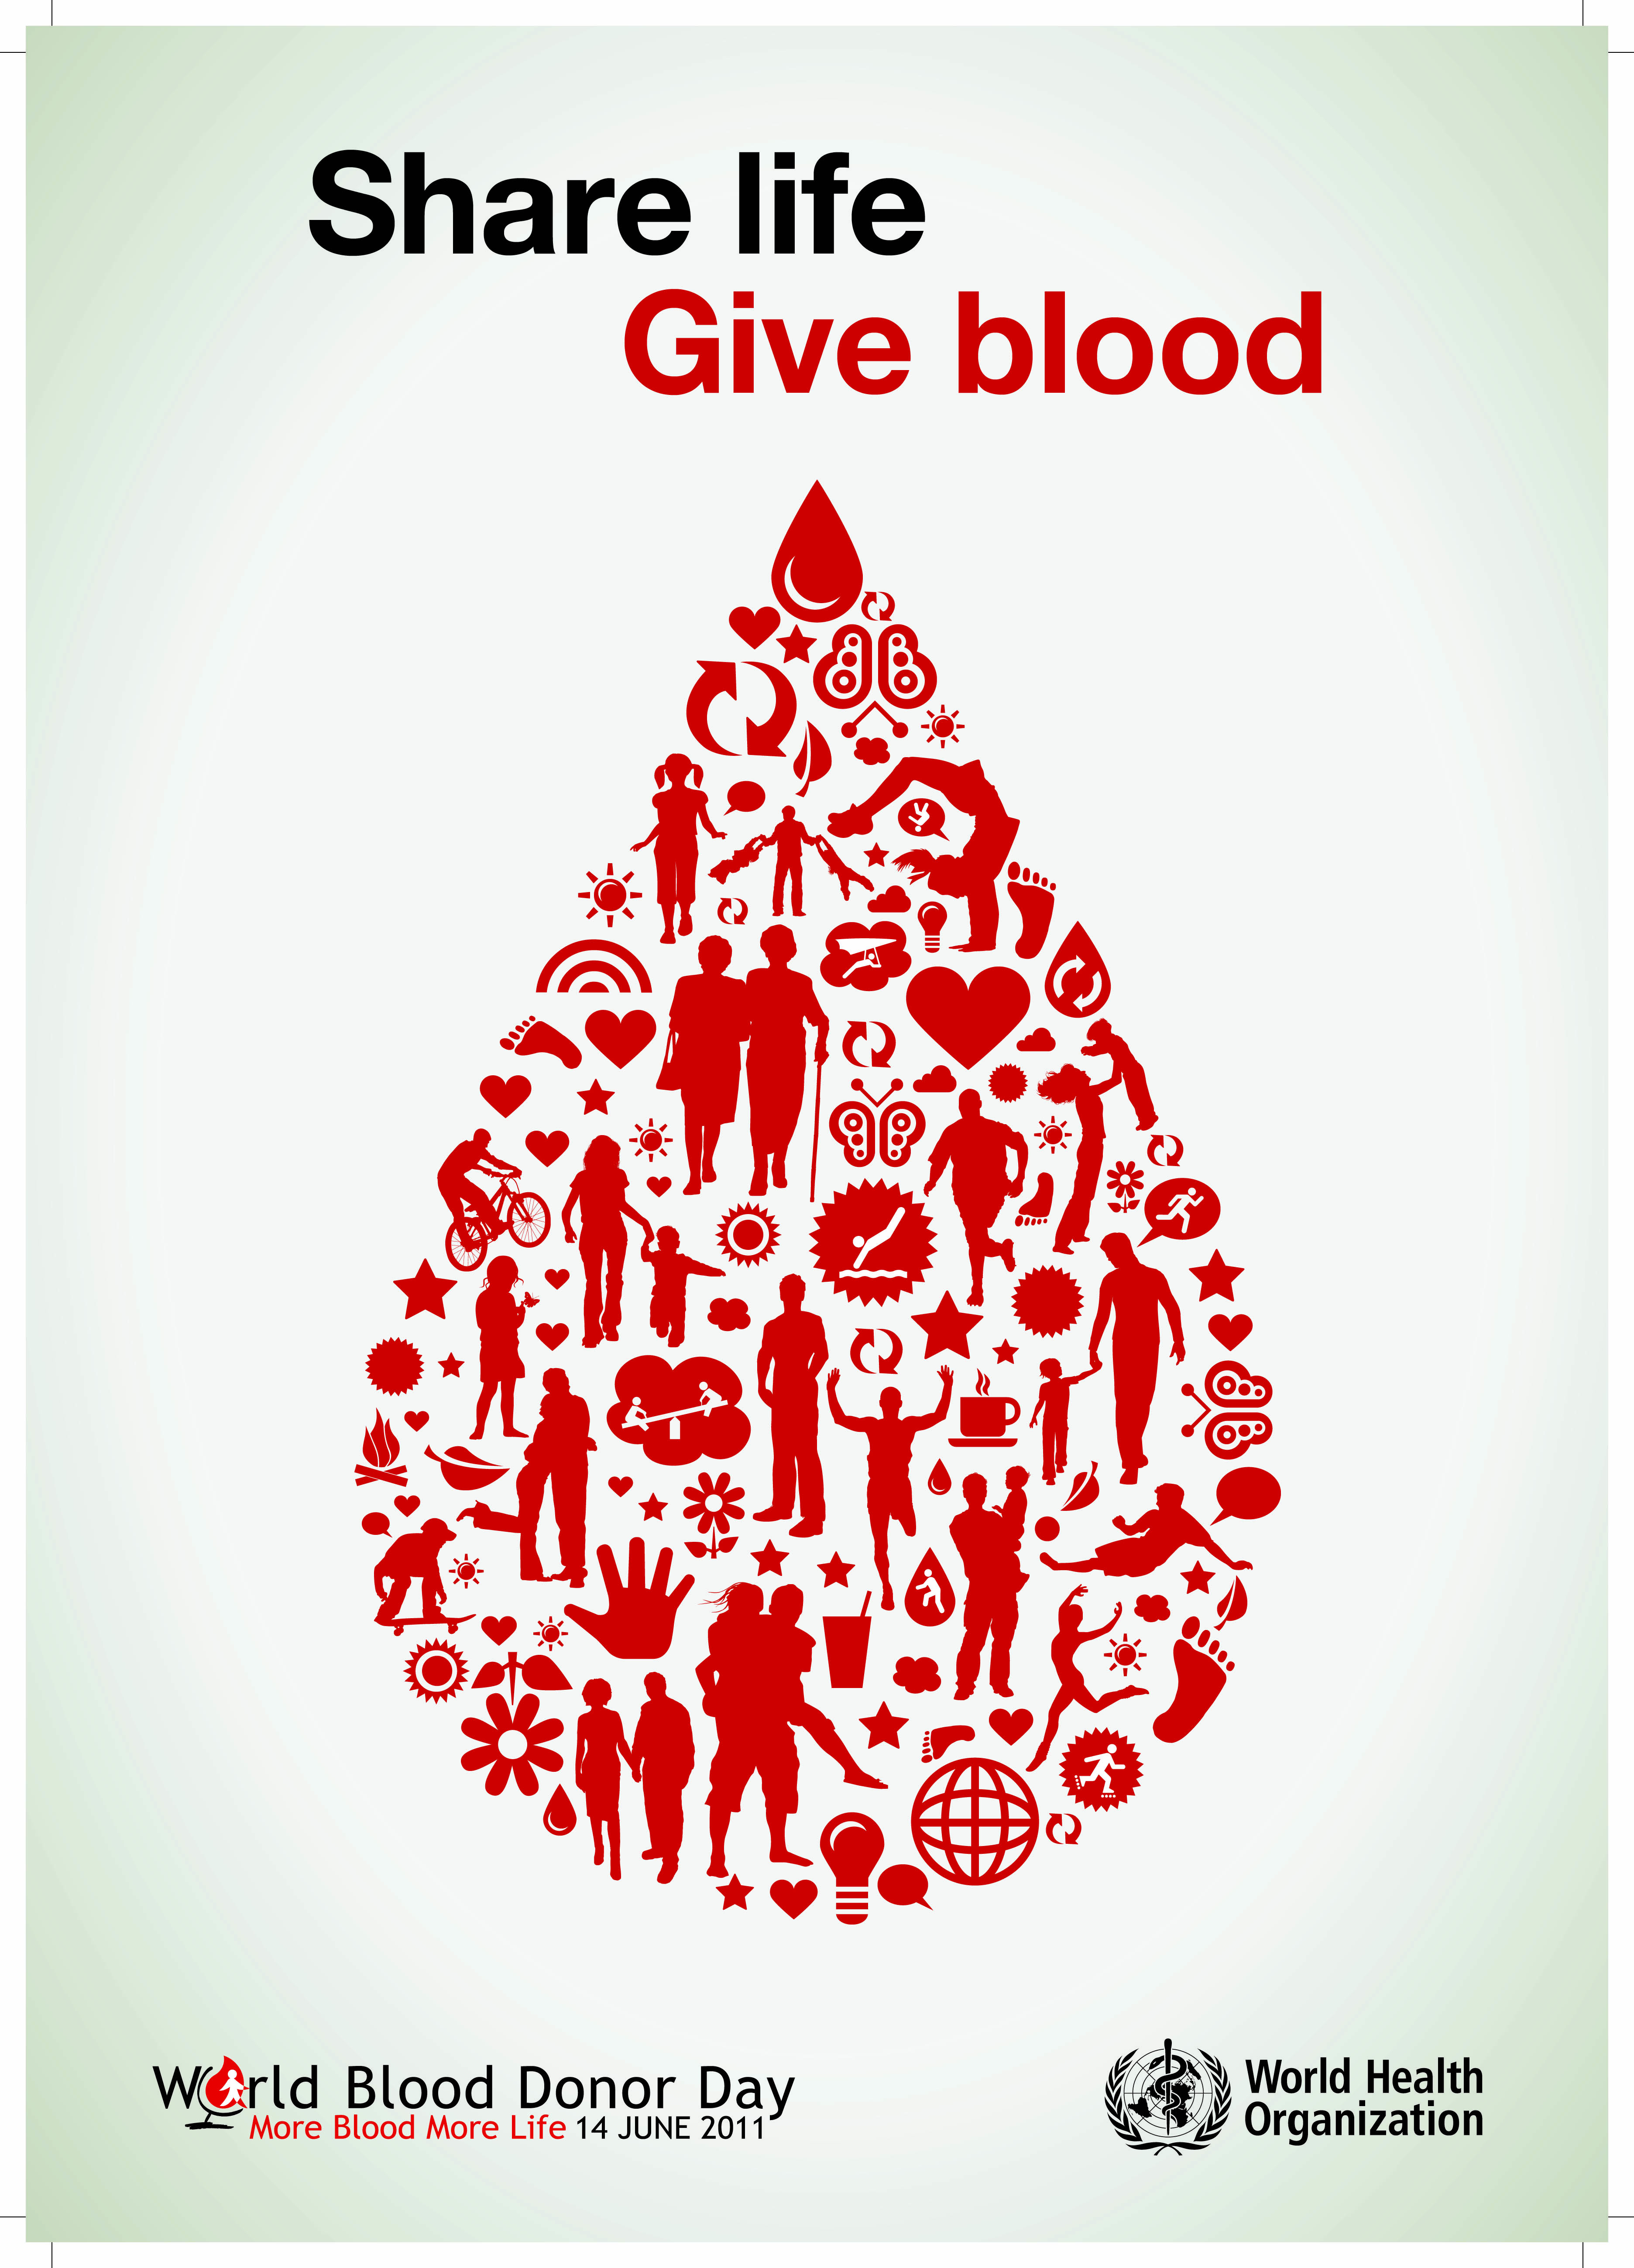 free blood donation clipart - photo #48